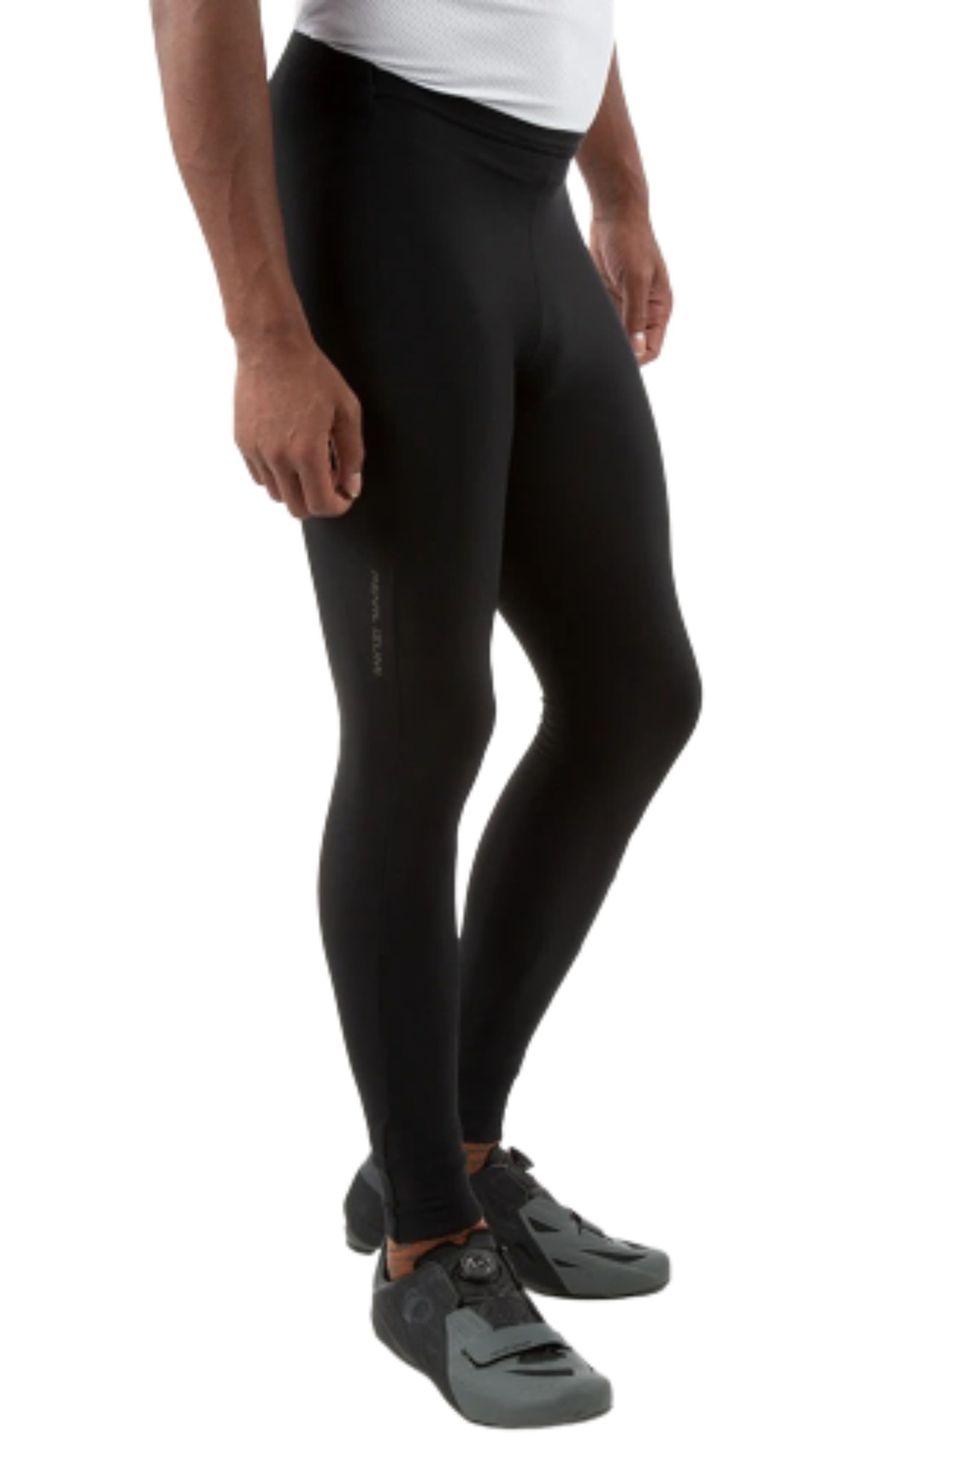 Best thermals for men and women 2021 UK